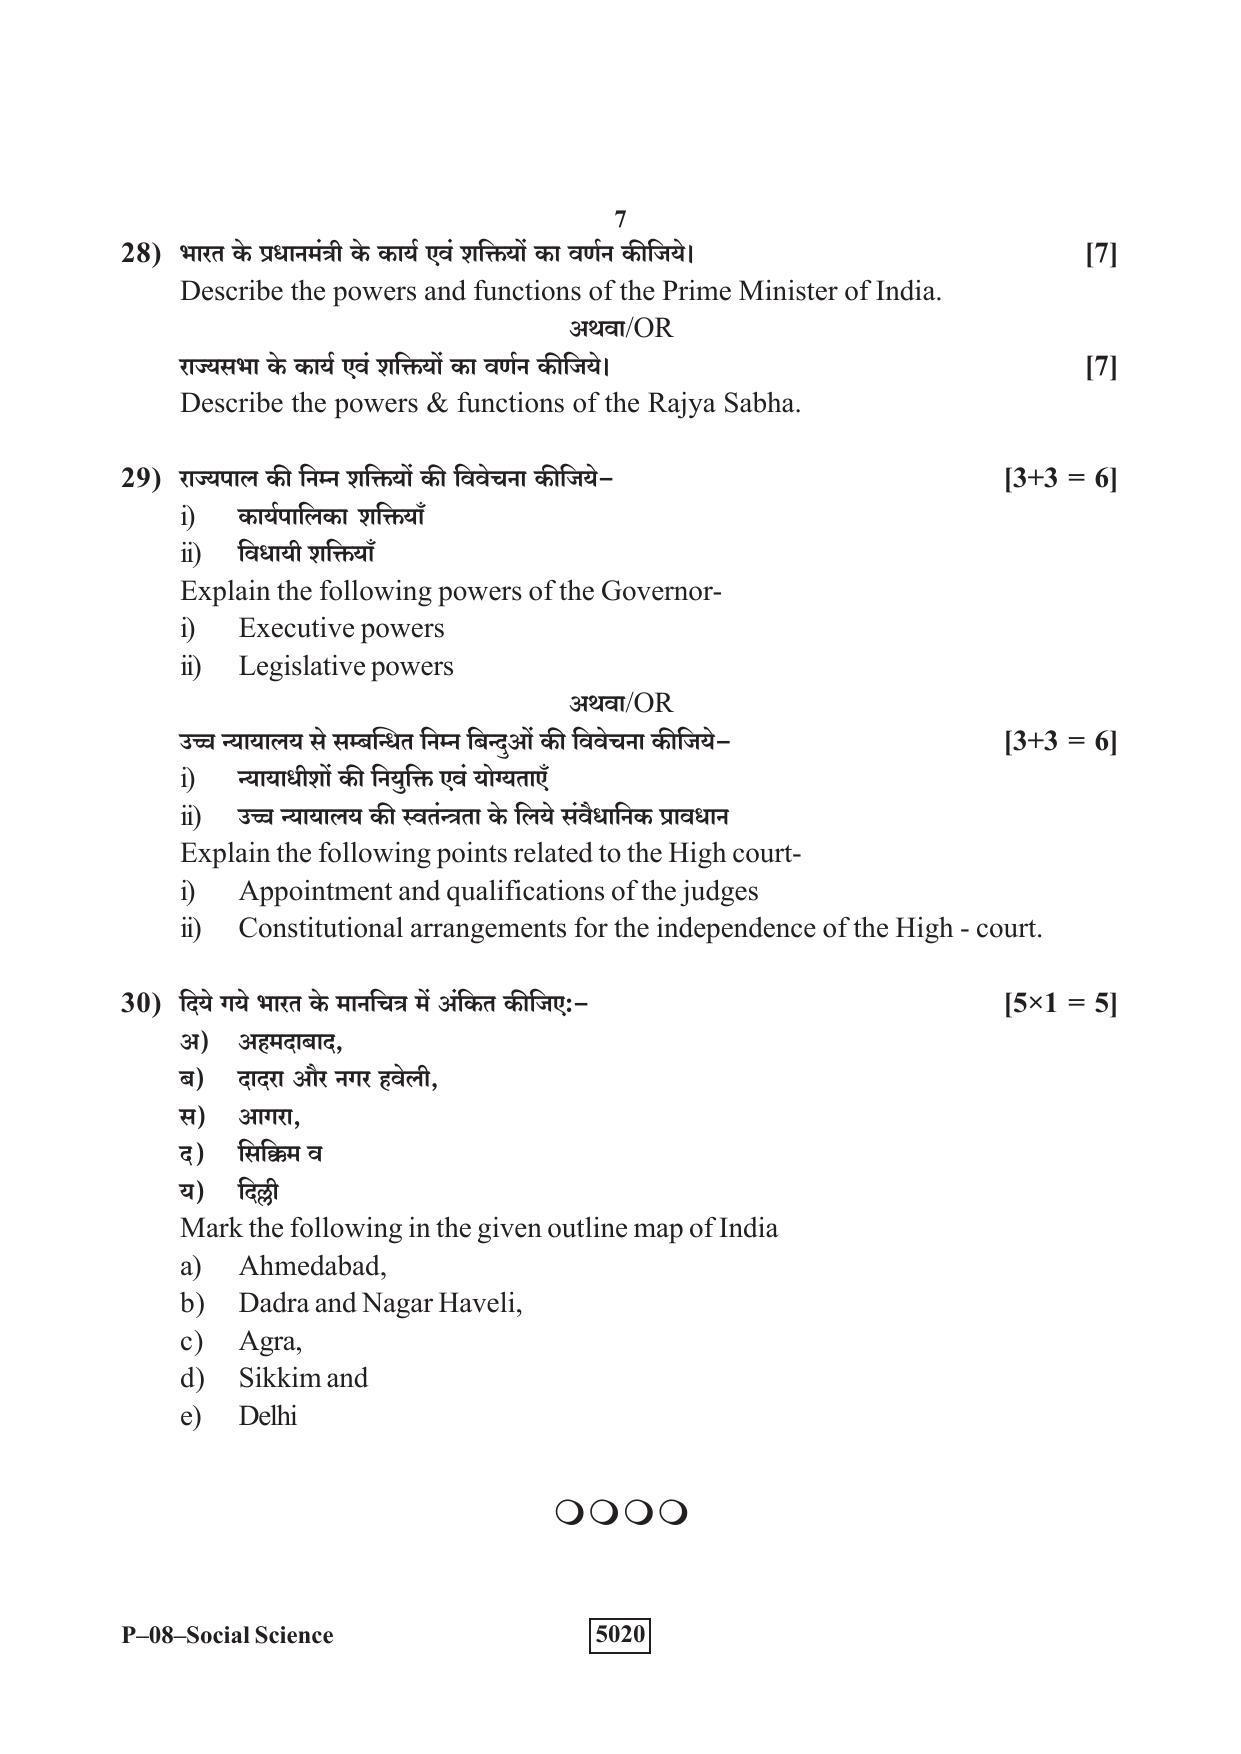 RBSE 2019 Social Science Praveshika Question Paper - Page 7